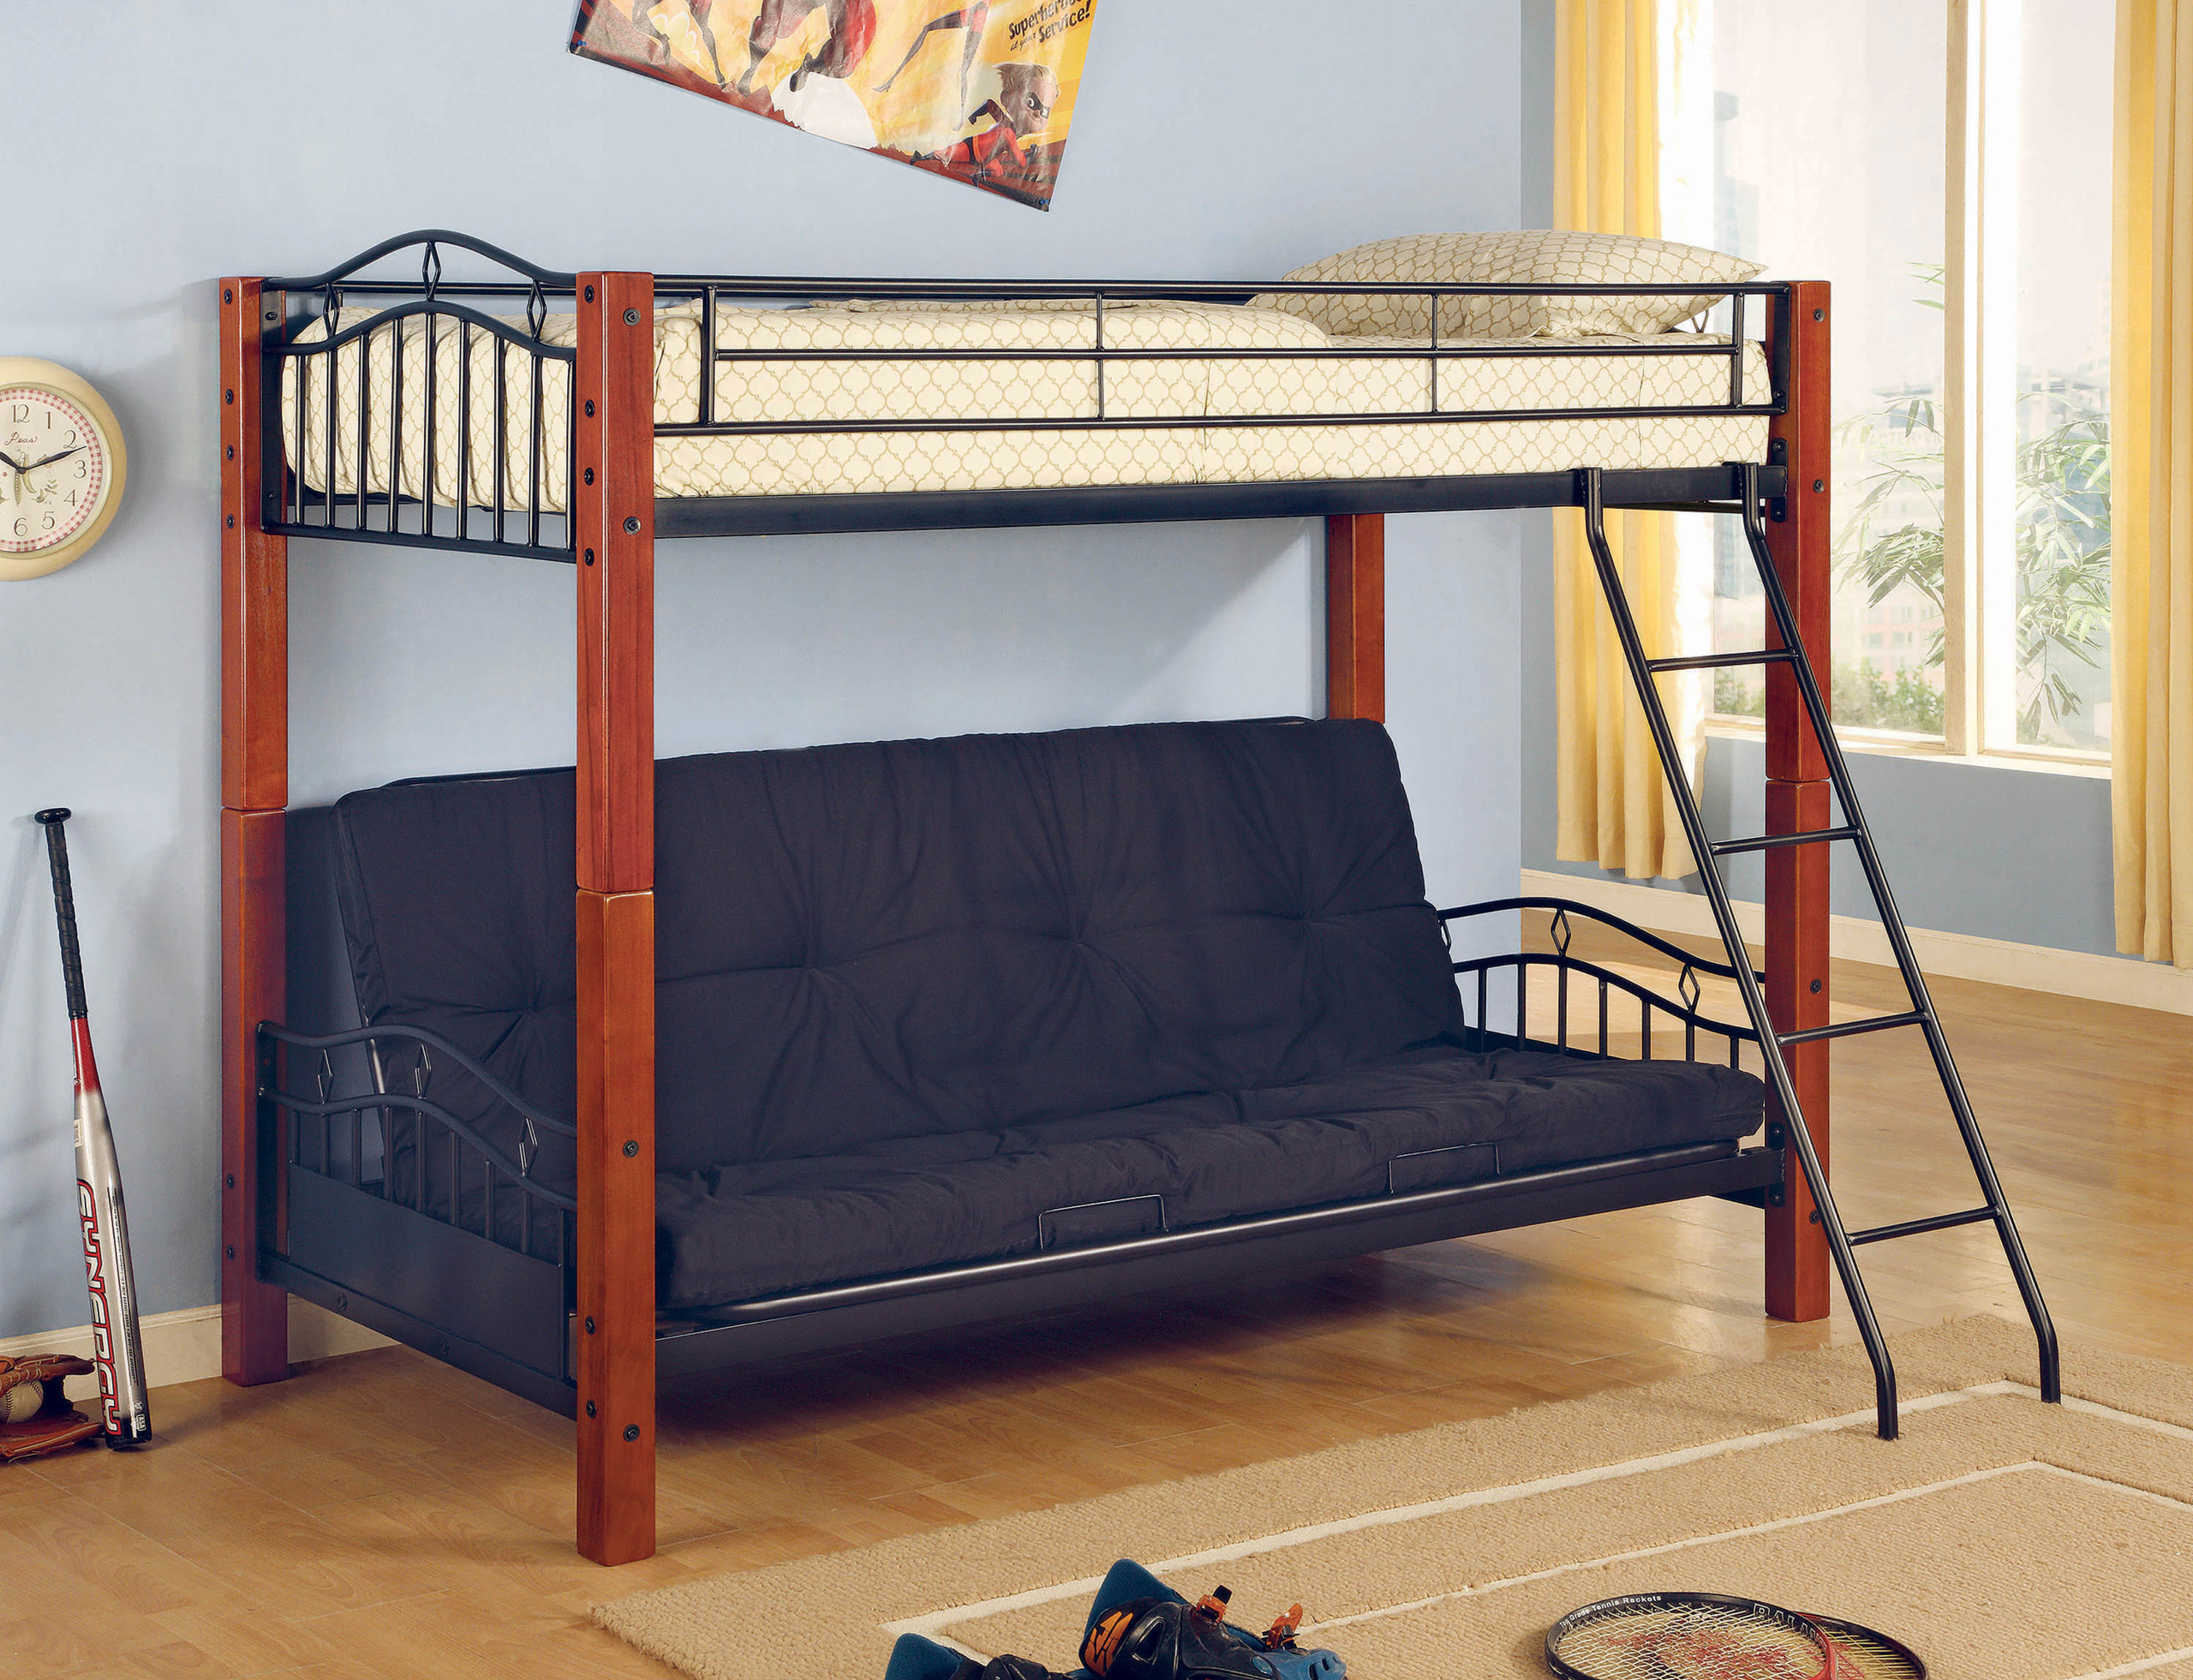 Full Over Futon Bunk Bed Visualhunt, Futon Bed With Bunk Bed